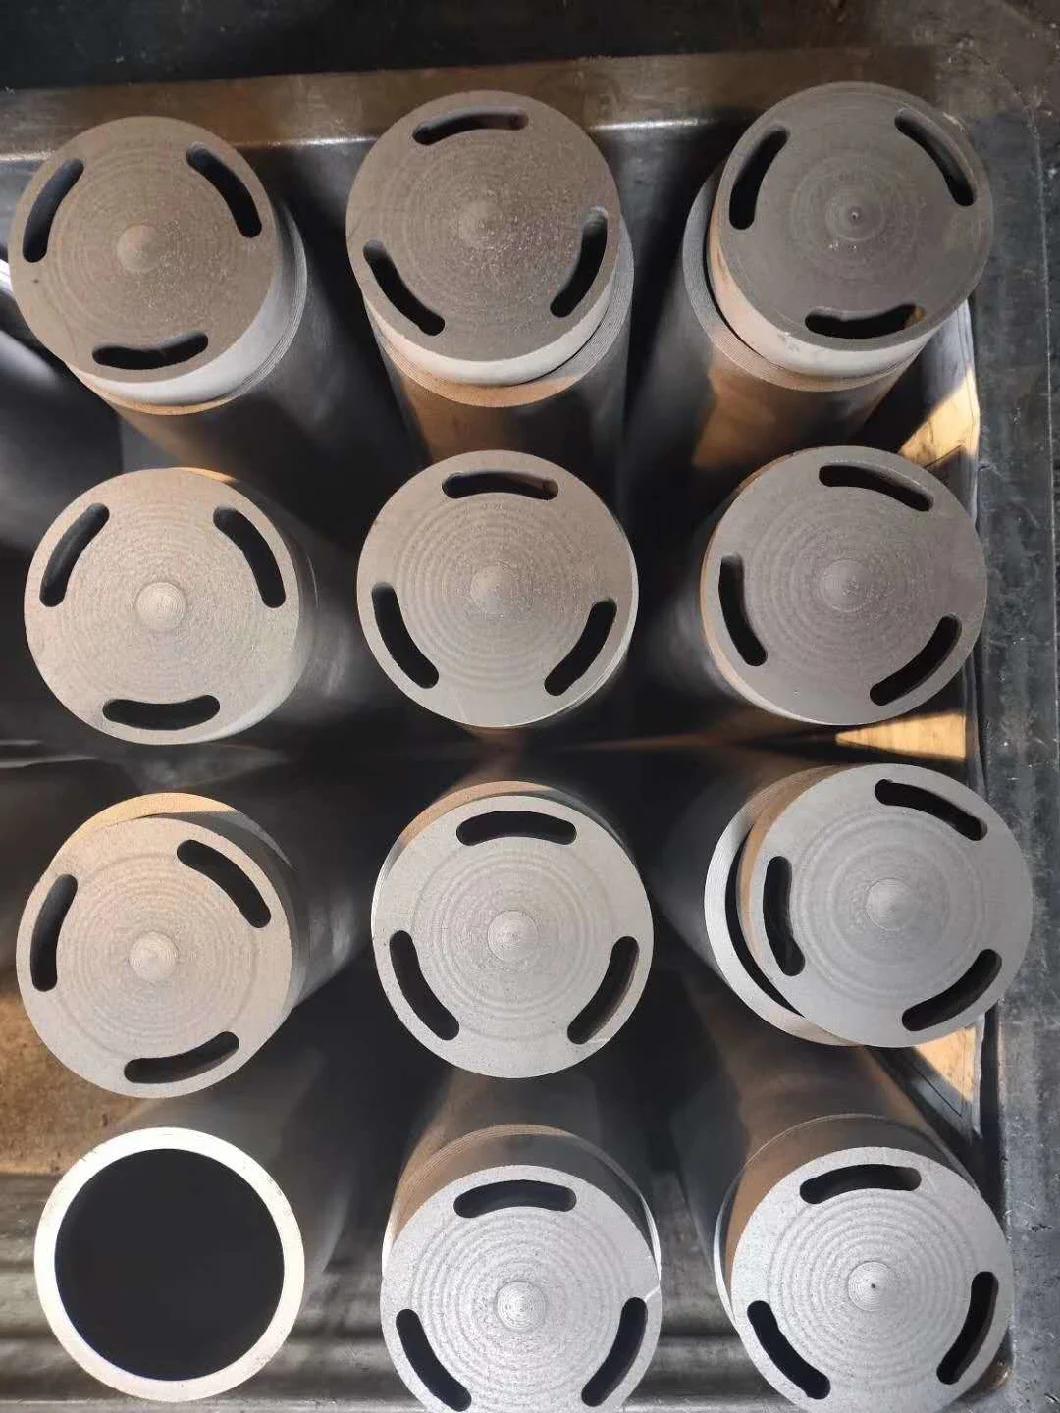 Water Jacket Peeling Mold Graphite Manufacture for Continuous Casting Brass